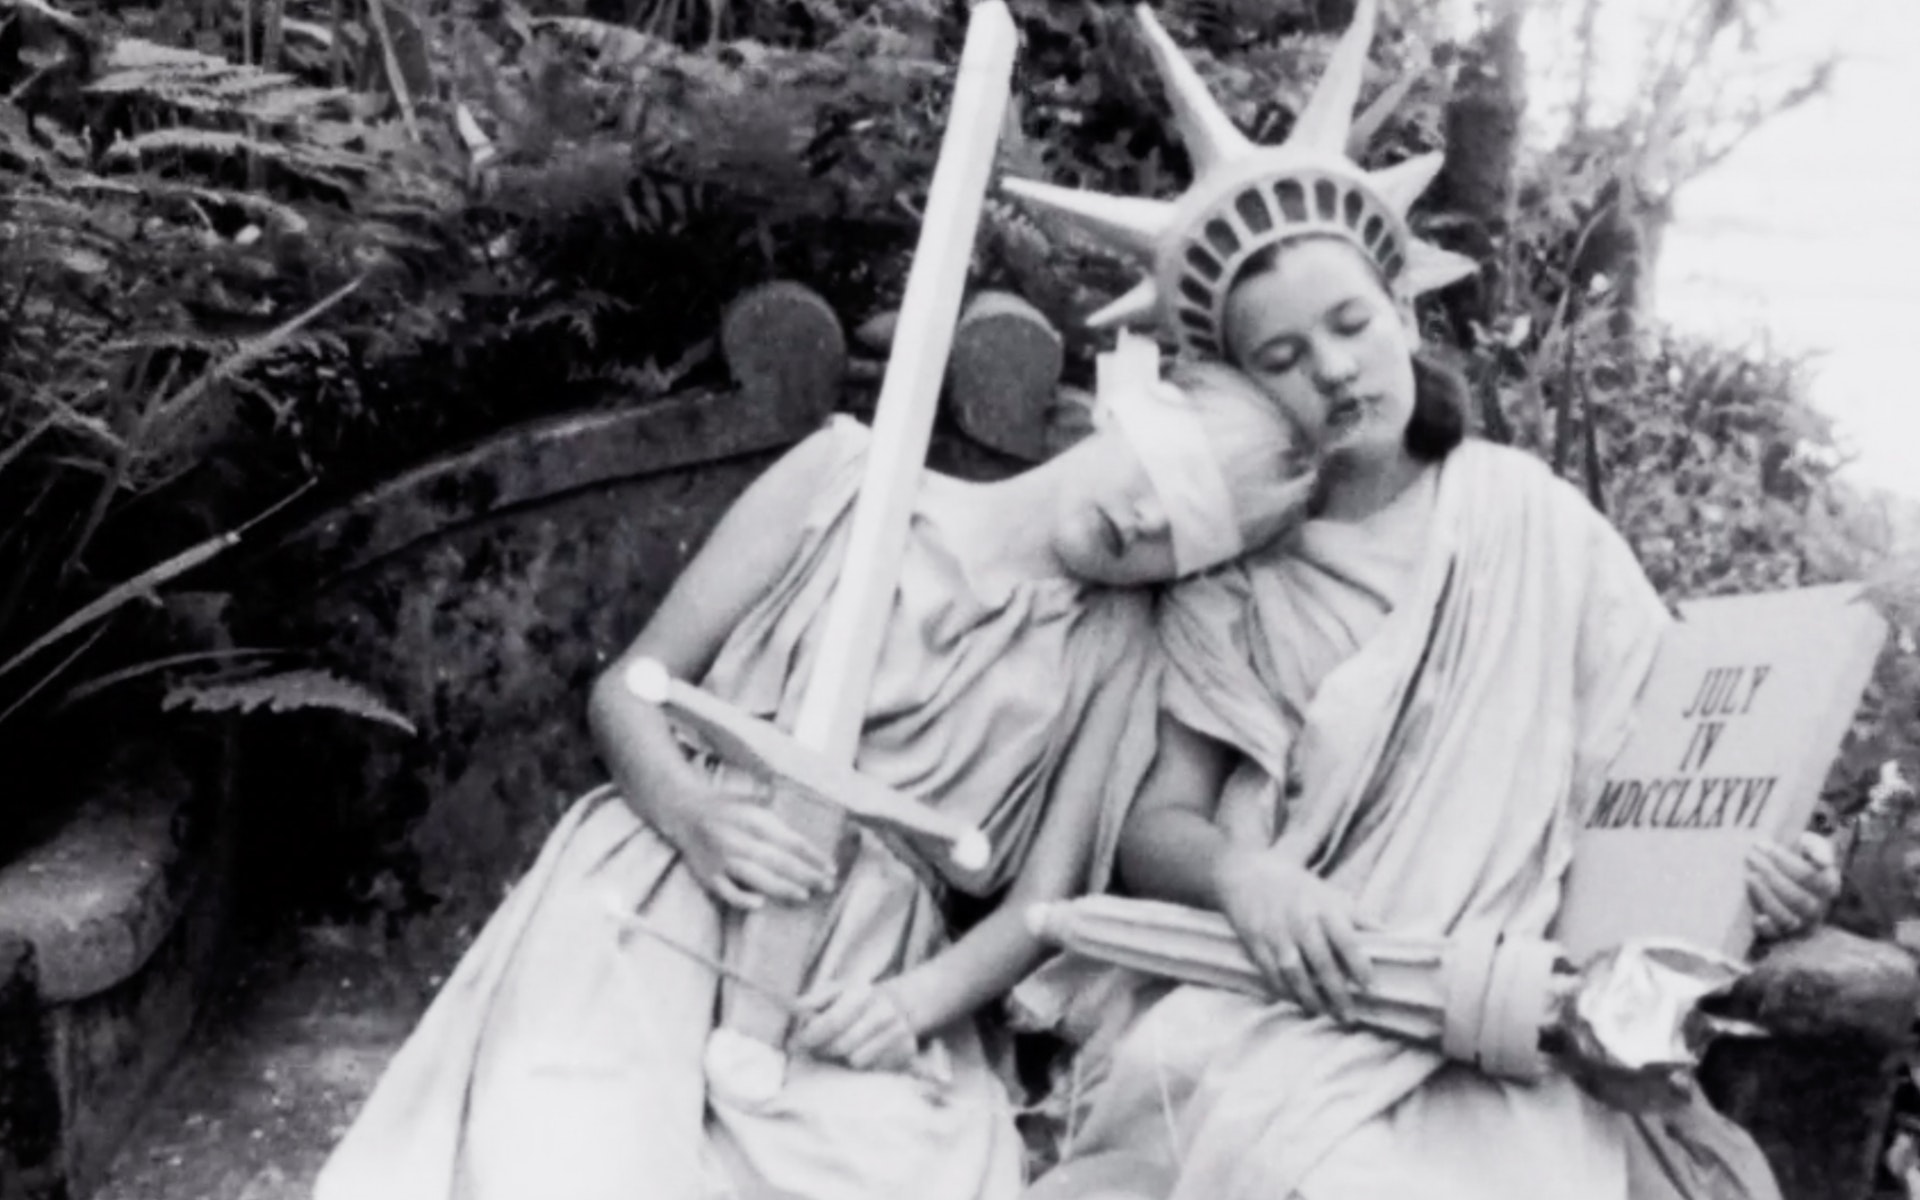 Two women sitting next to each other in togas. One wearing a blindfold holding a sword and scale, the other in the Statue of Liberty attire (crown, torch).